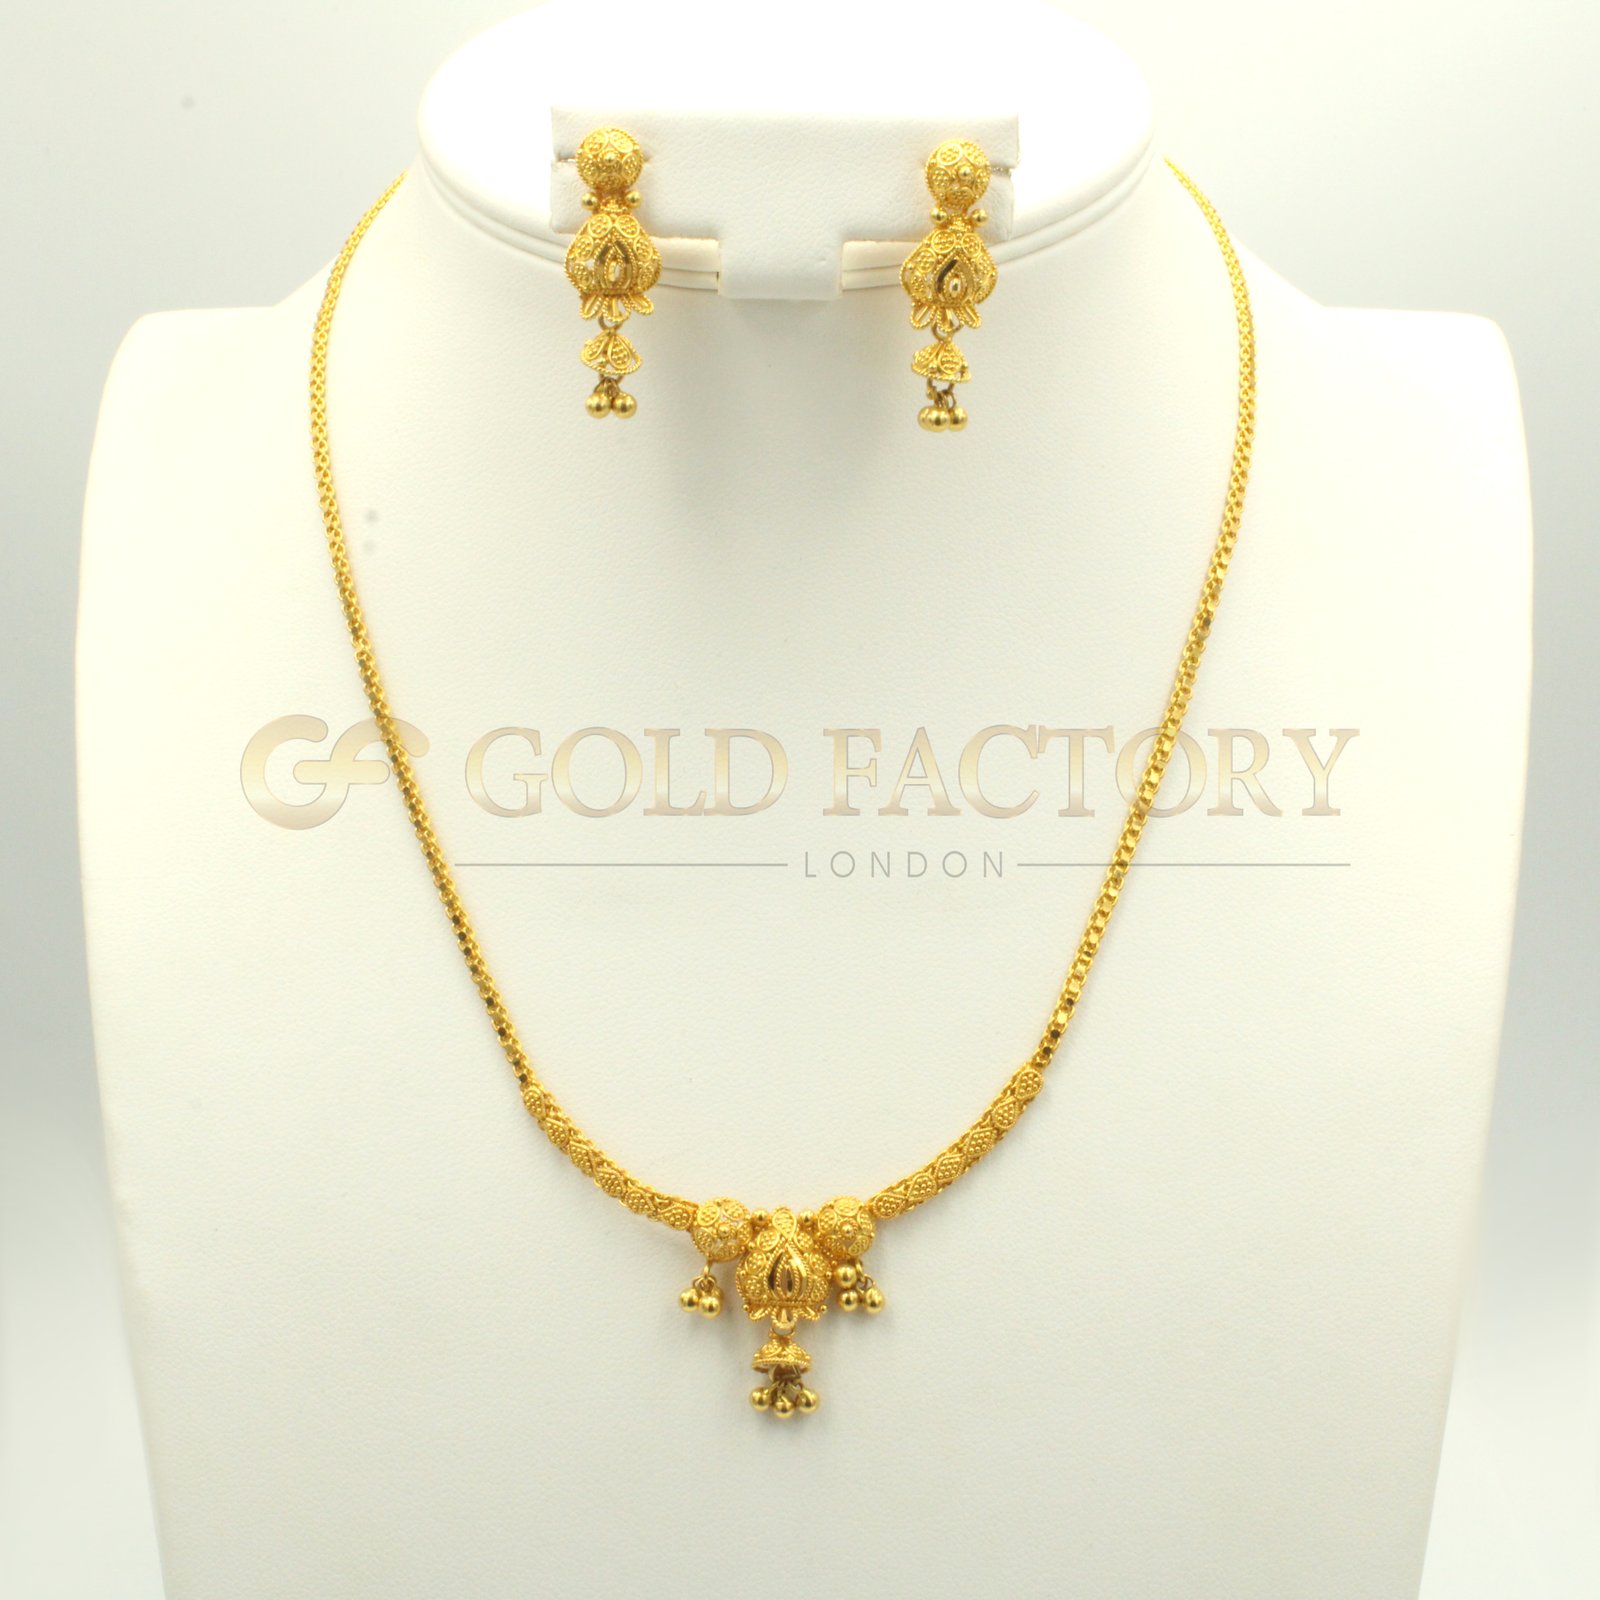 Pretty 22ct Gold Necklace Set with Choomki Earrings